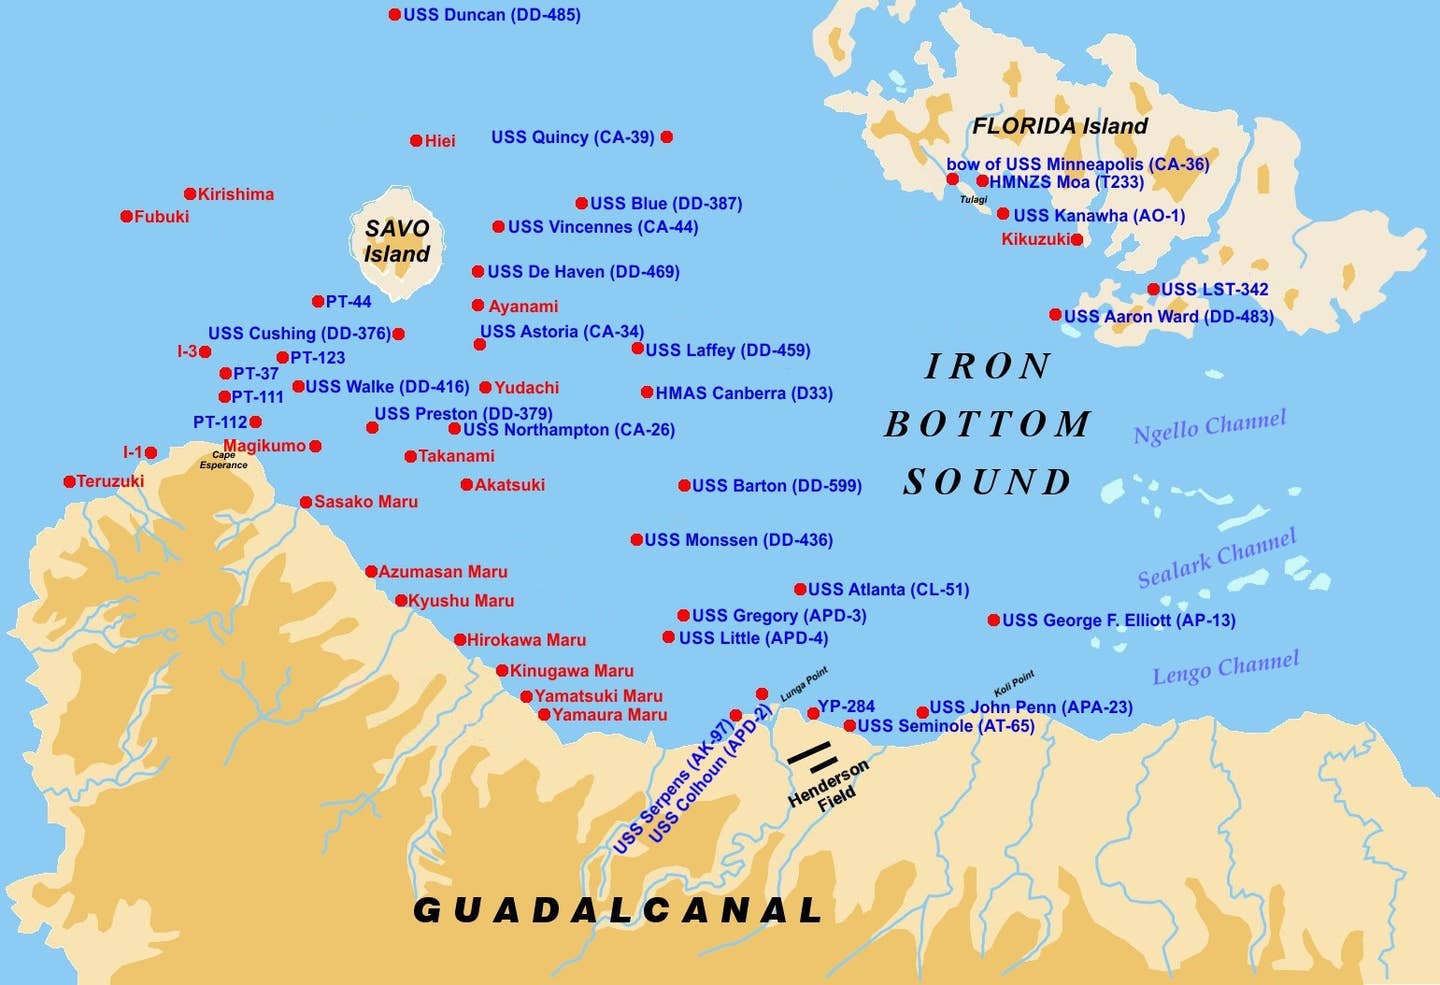 A chart of Iron Bottom Sound, located north of Guadalcanal, showing the numerous ships lying on the seafloor, including the remains of USS Serpens at Lunga Point.